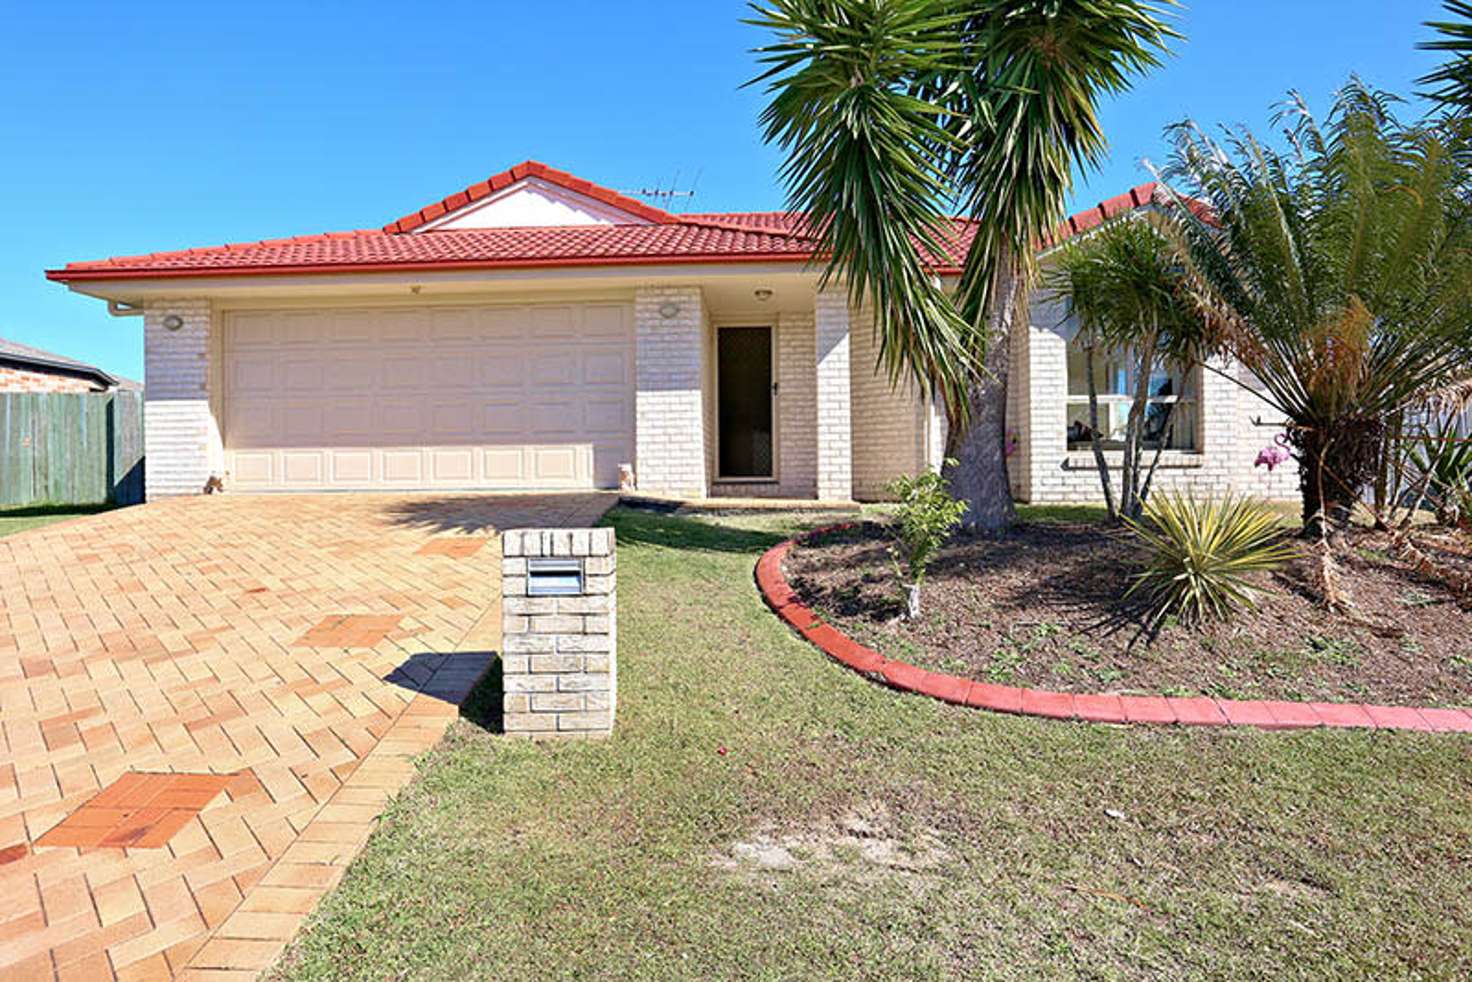 Main view of Homely house listing, 4 Tilley Ct, Caboolture QLD 4510